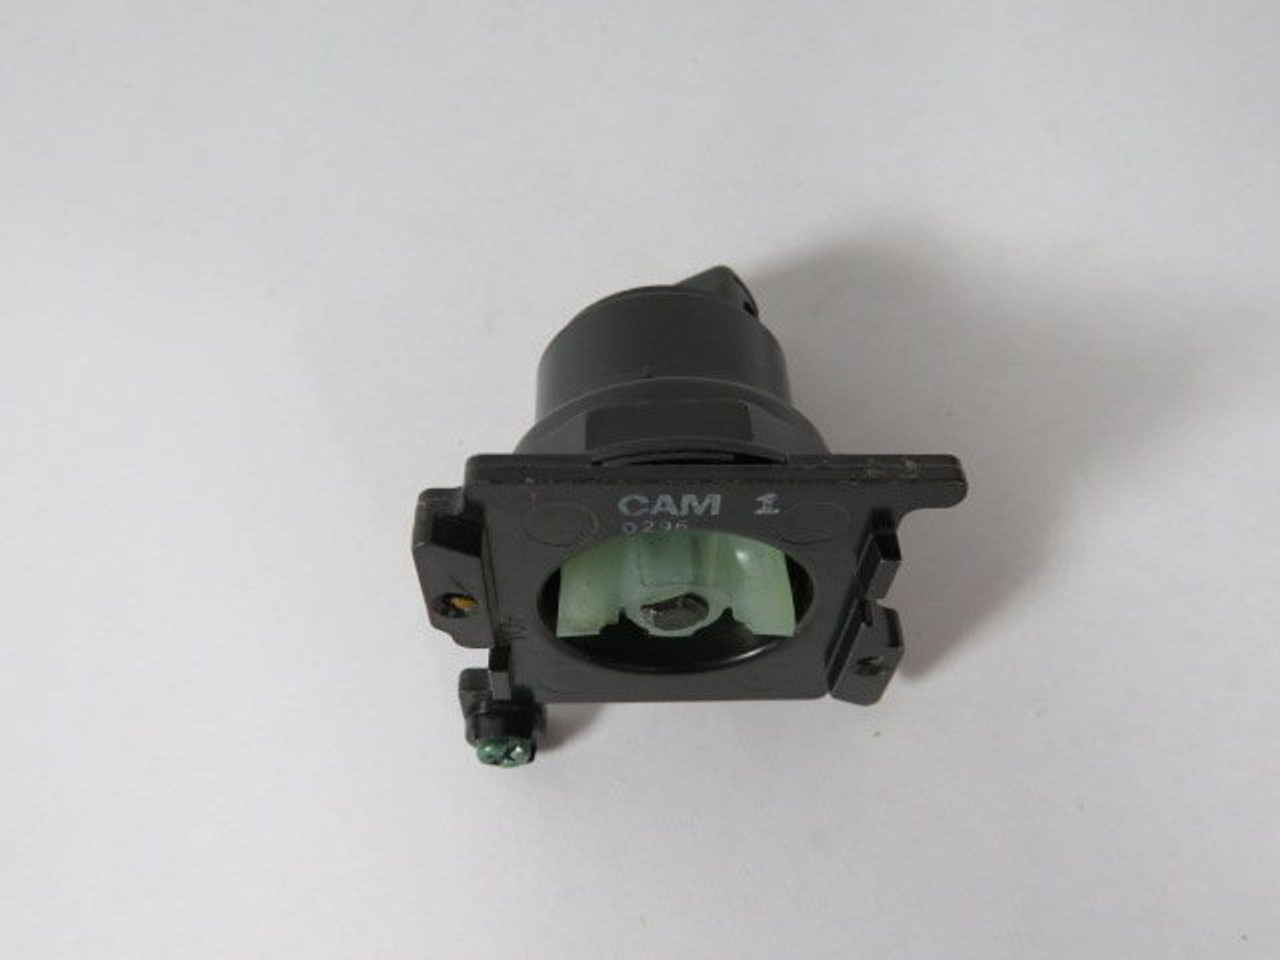 Cutler-Hammer E34VFBK1 Selector Switch Operator Only 2-Position CAM1 USED